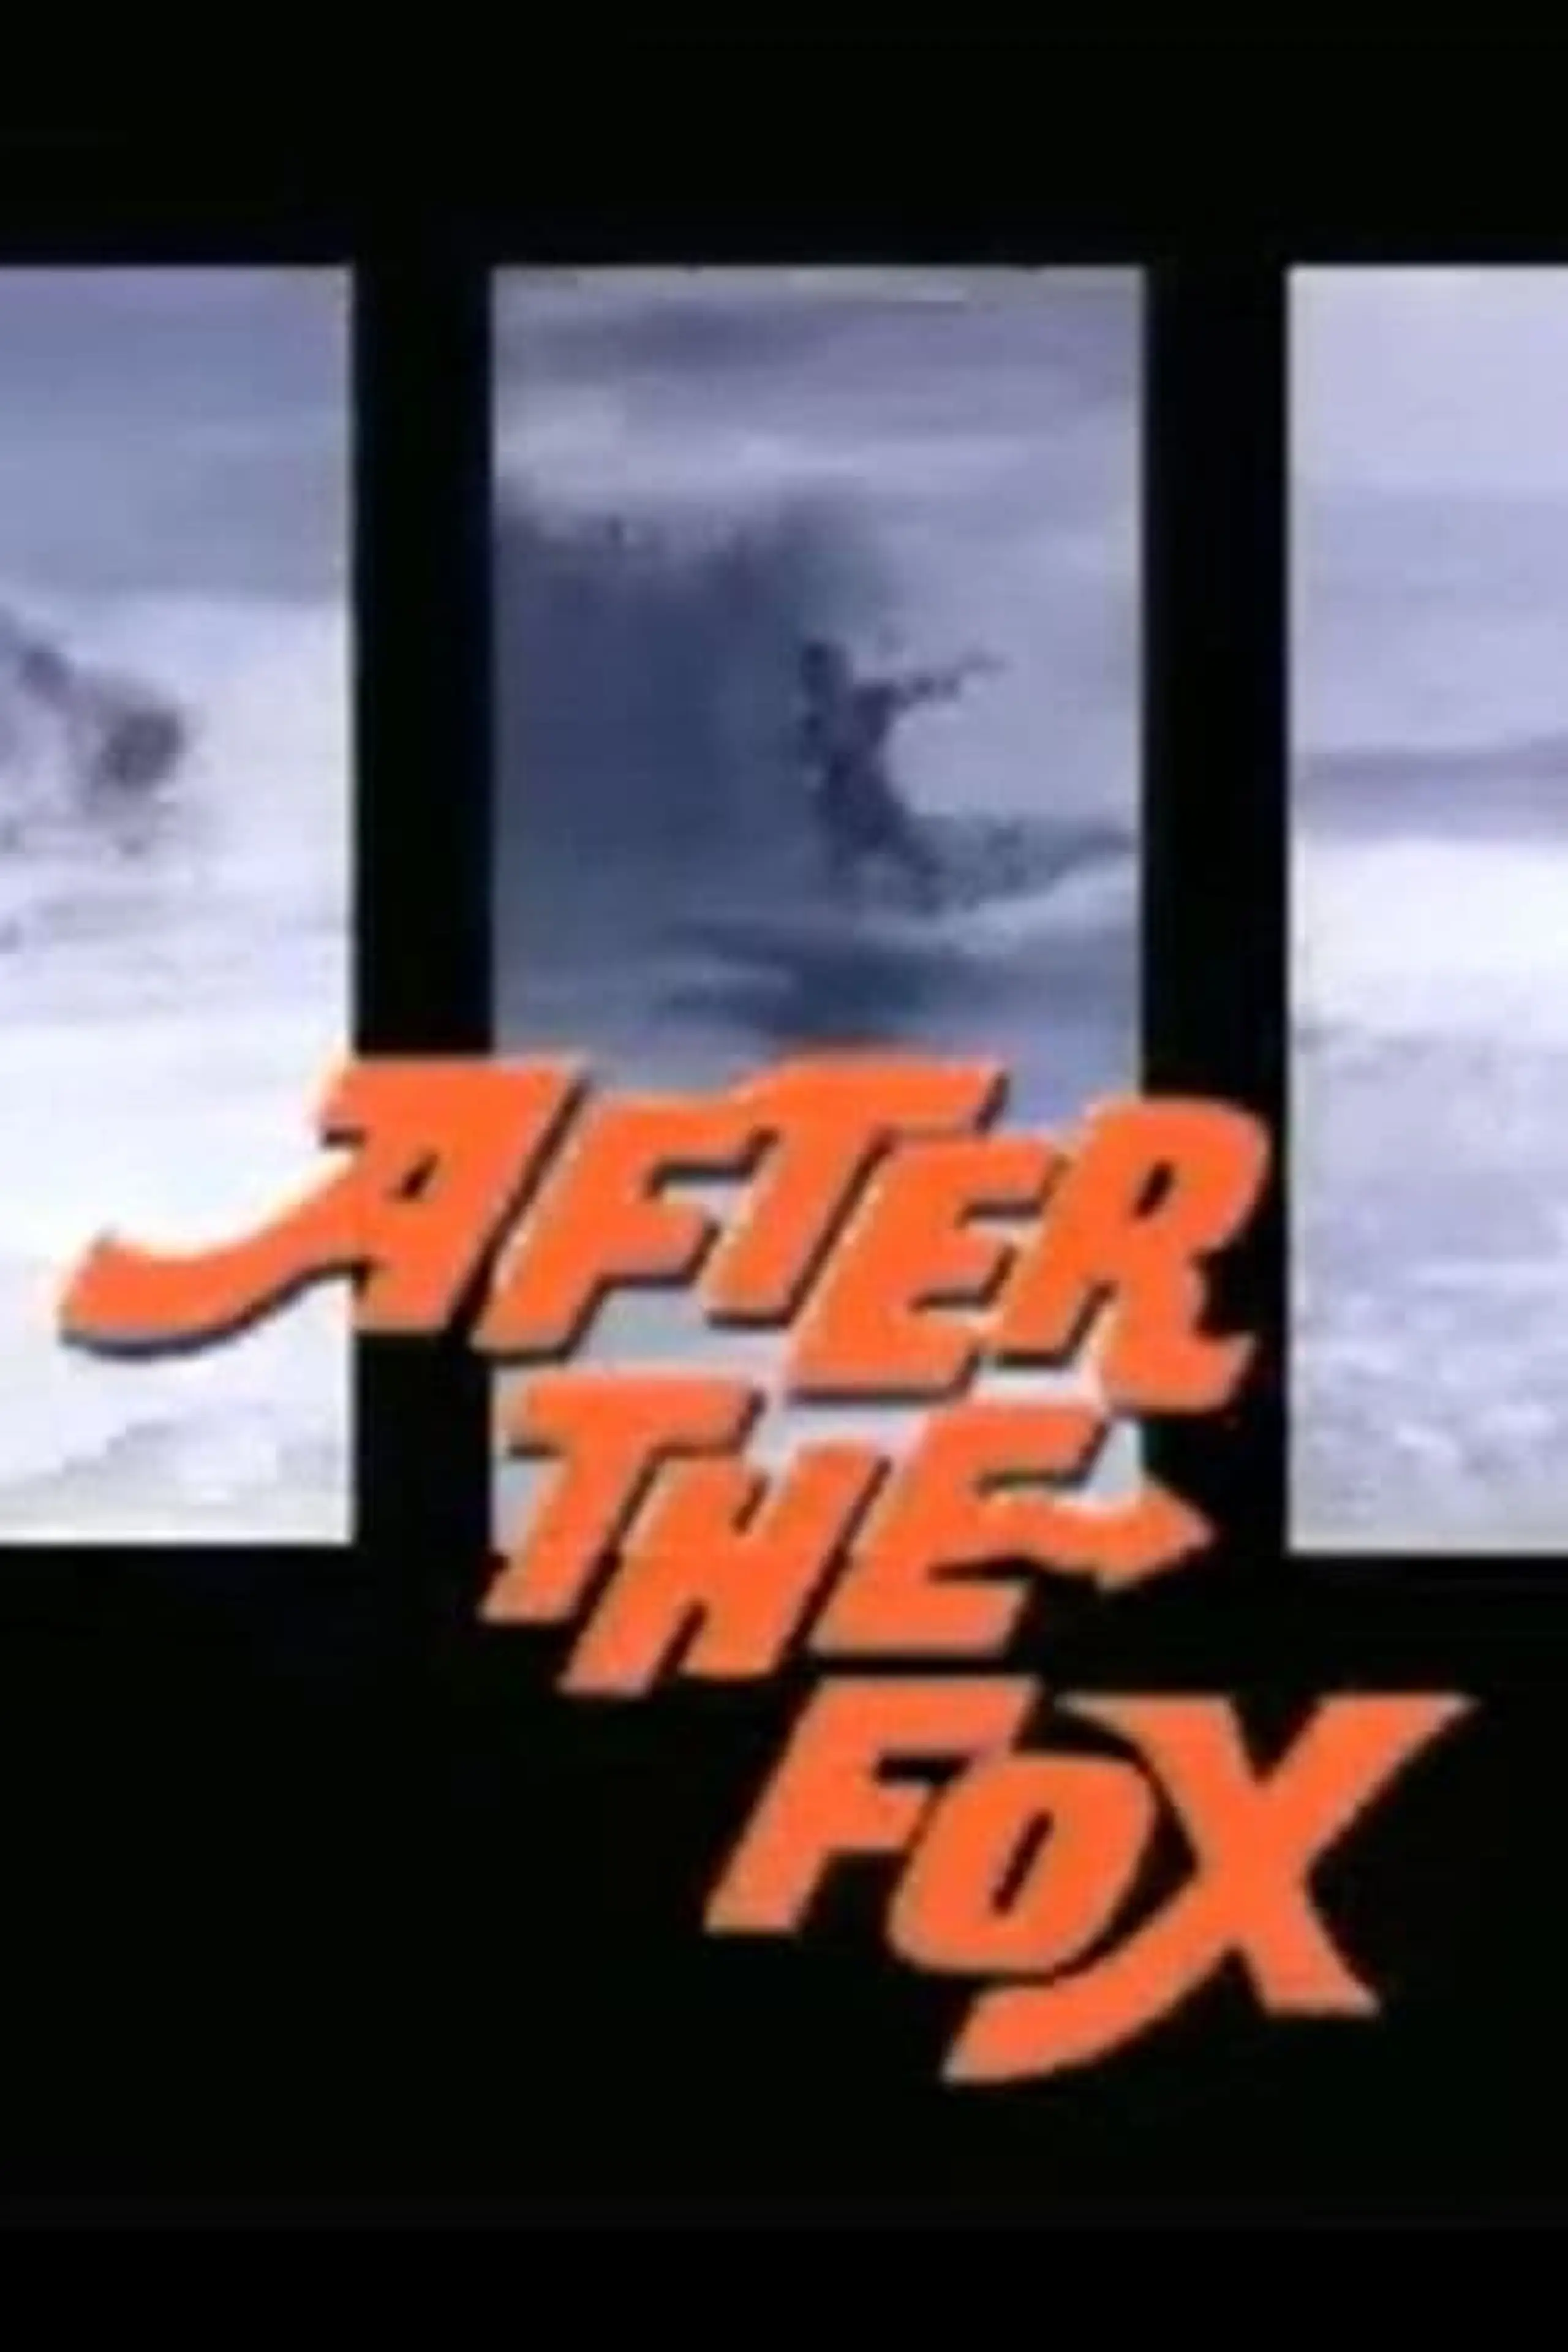 After the Fox